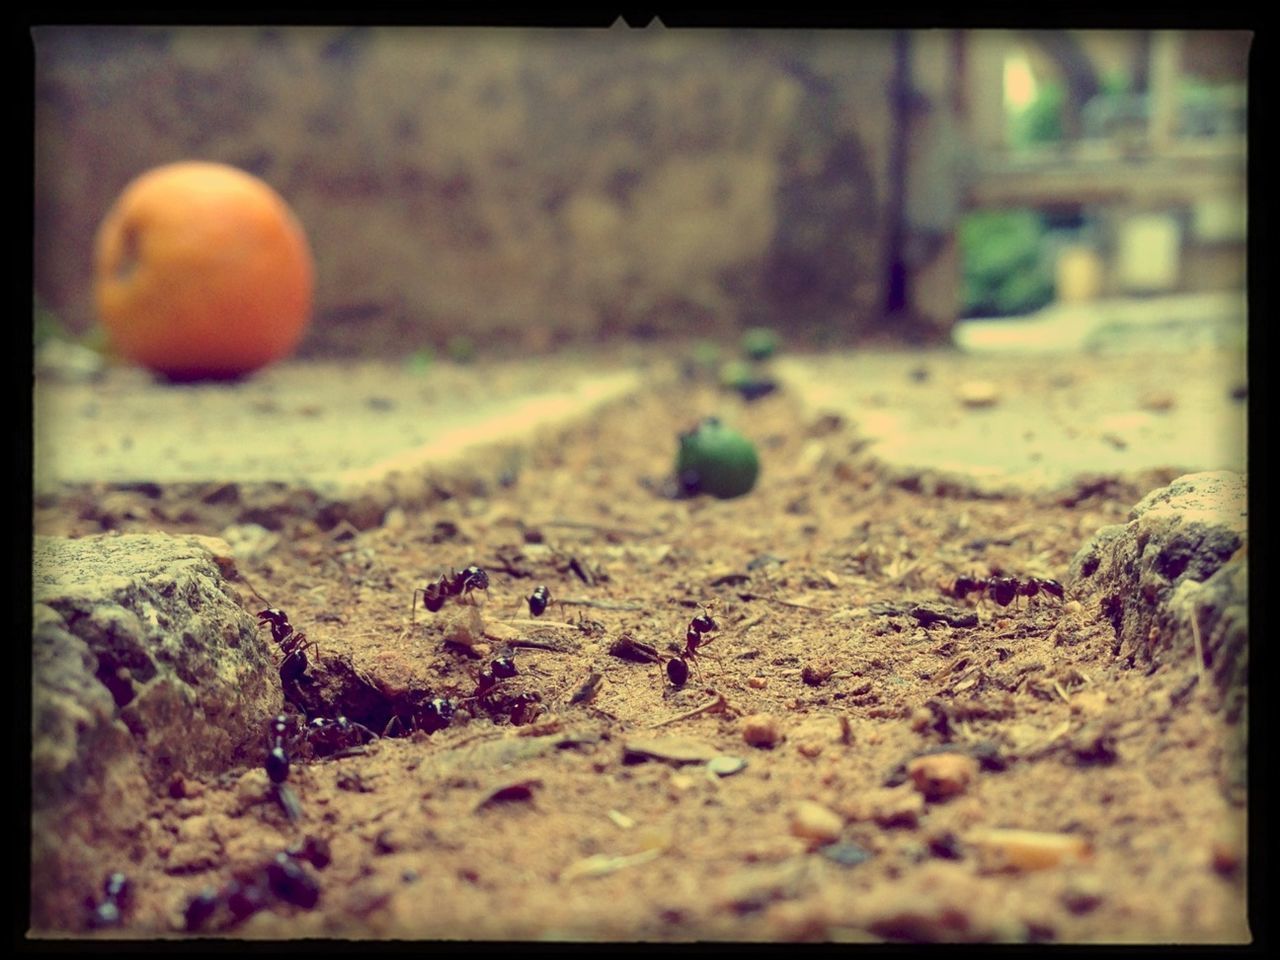 transfer print, auto post production filter, selective focus, nature, surface level, field, close-up, sand, outdoors, no people, day, tranquility, sunlight, focus on foreground, grass, orange color, beach, vignette, ground, leaf